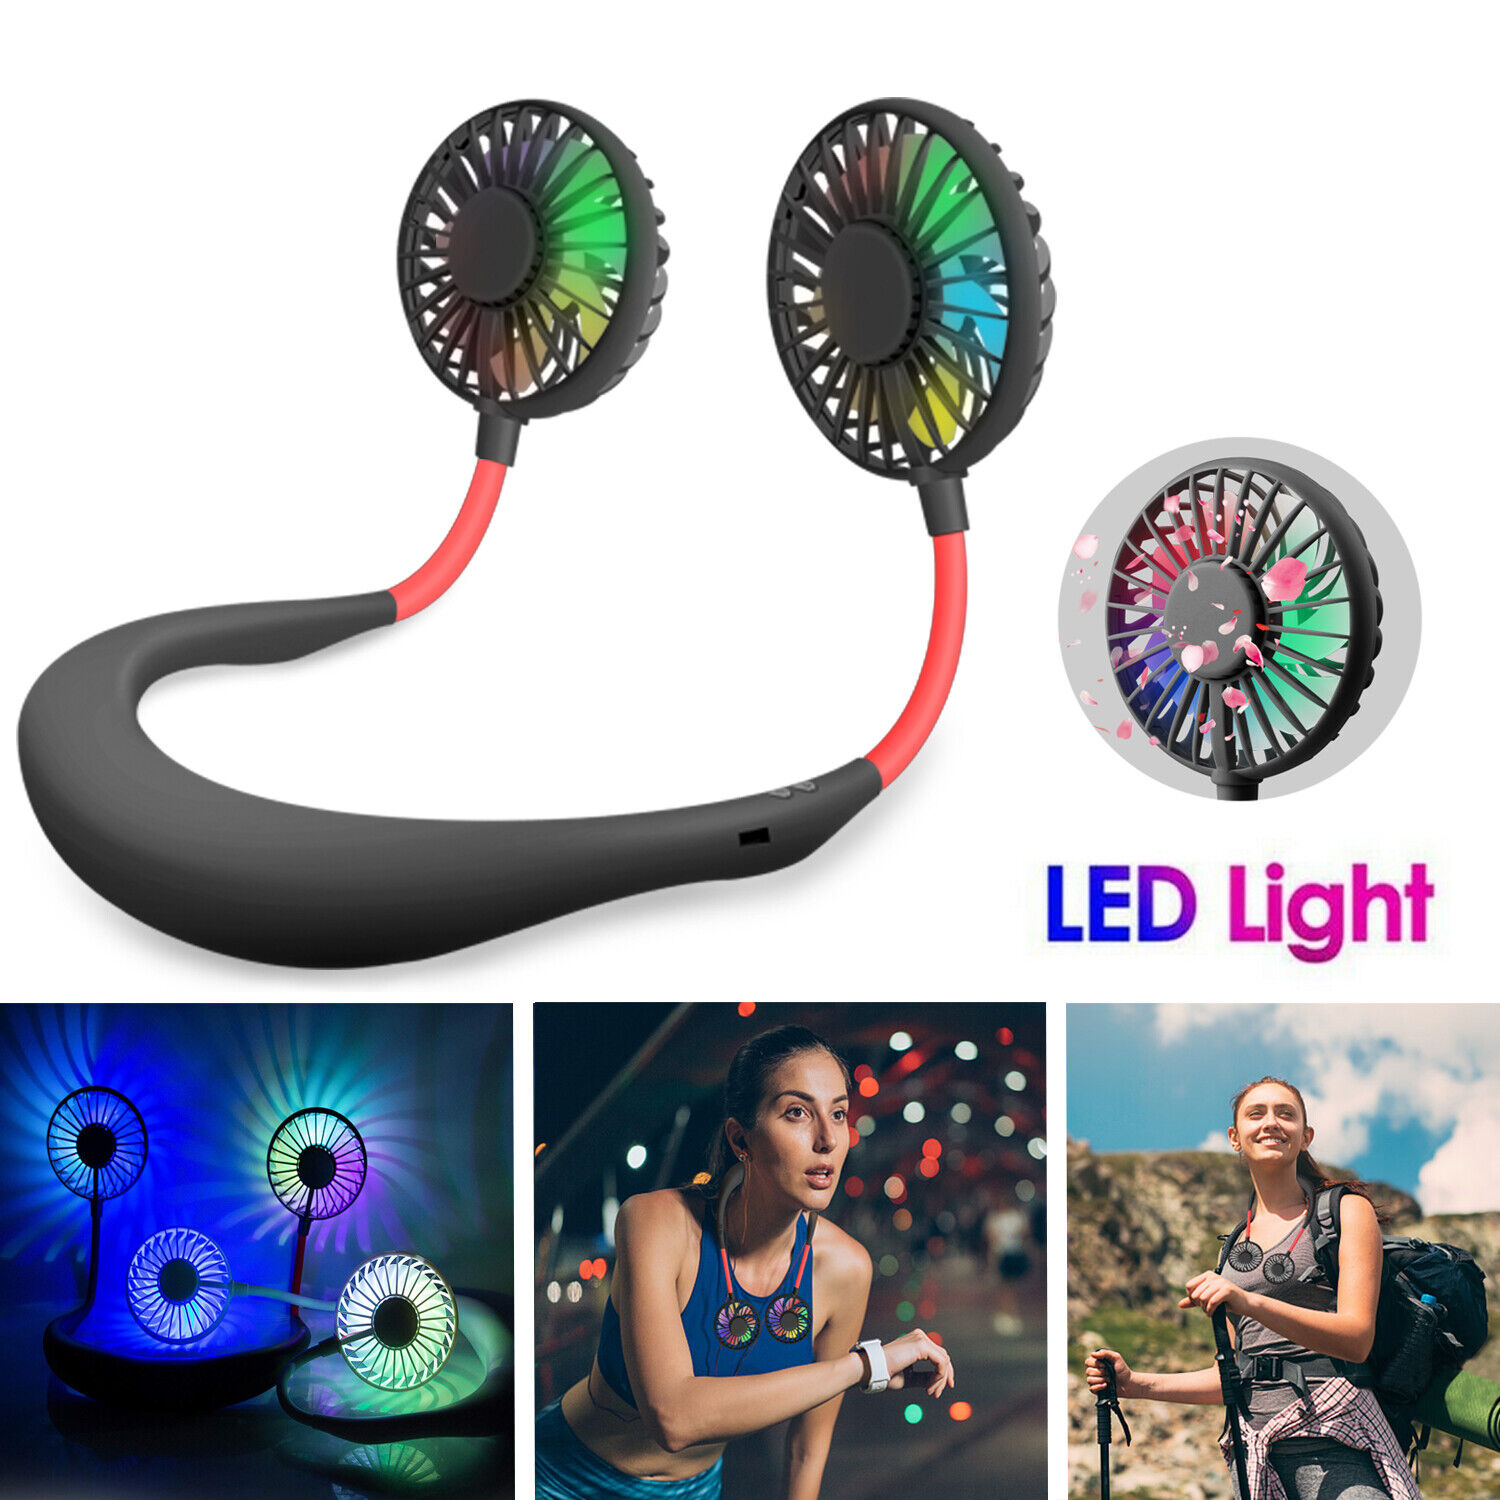 Portable USB Rechargeable LED Lazy Fan Hanging Neck Mini Cooling Sports Rest Fan